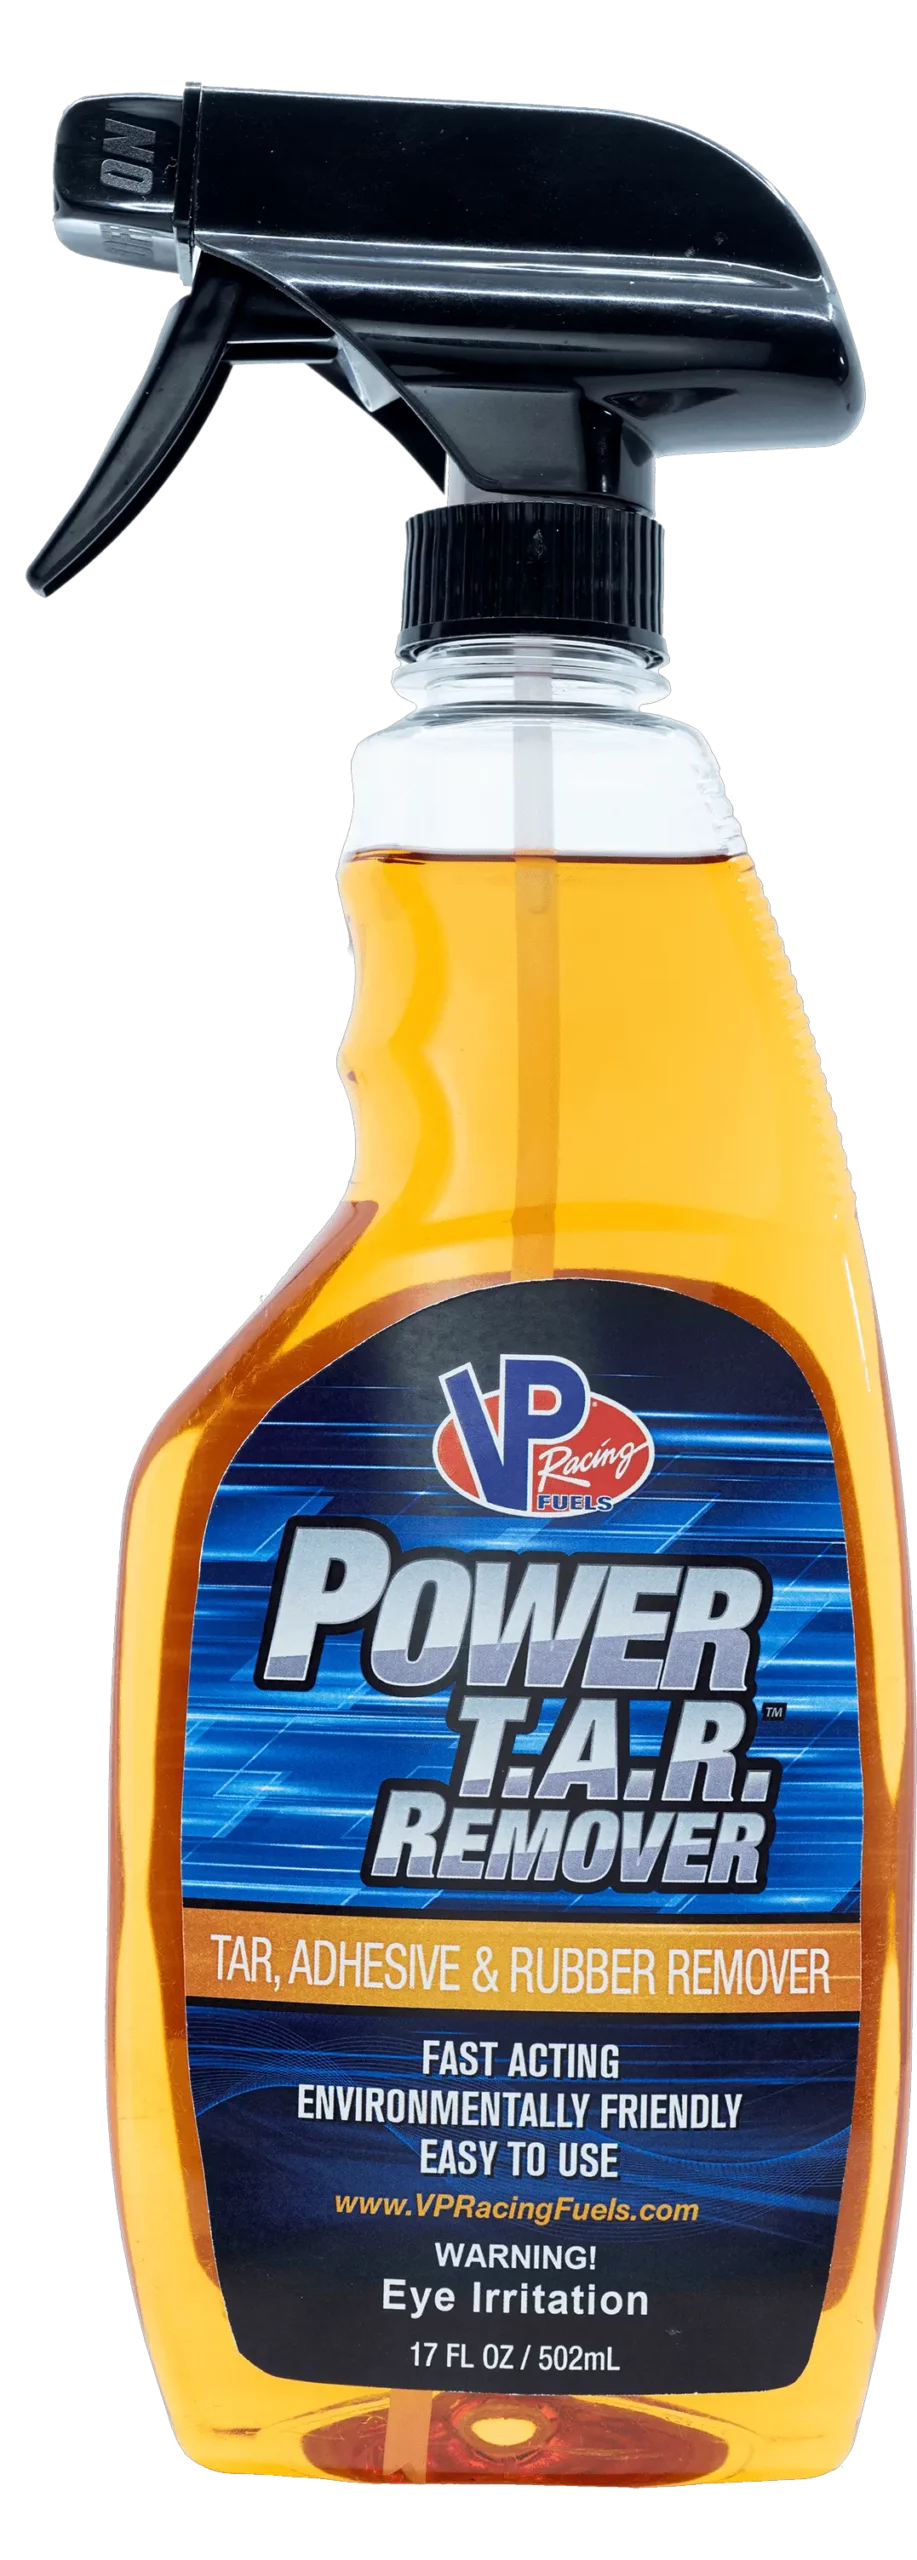 Best Tire Rubber Remover, Power™ Tar